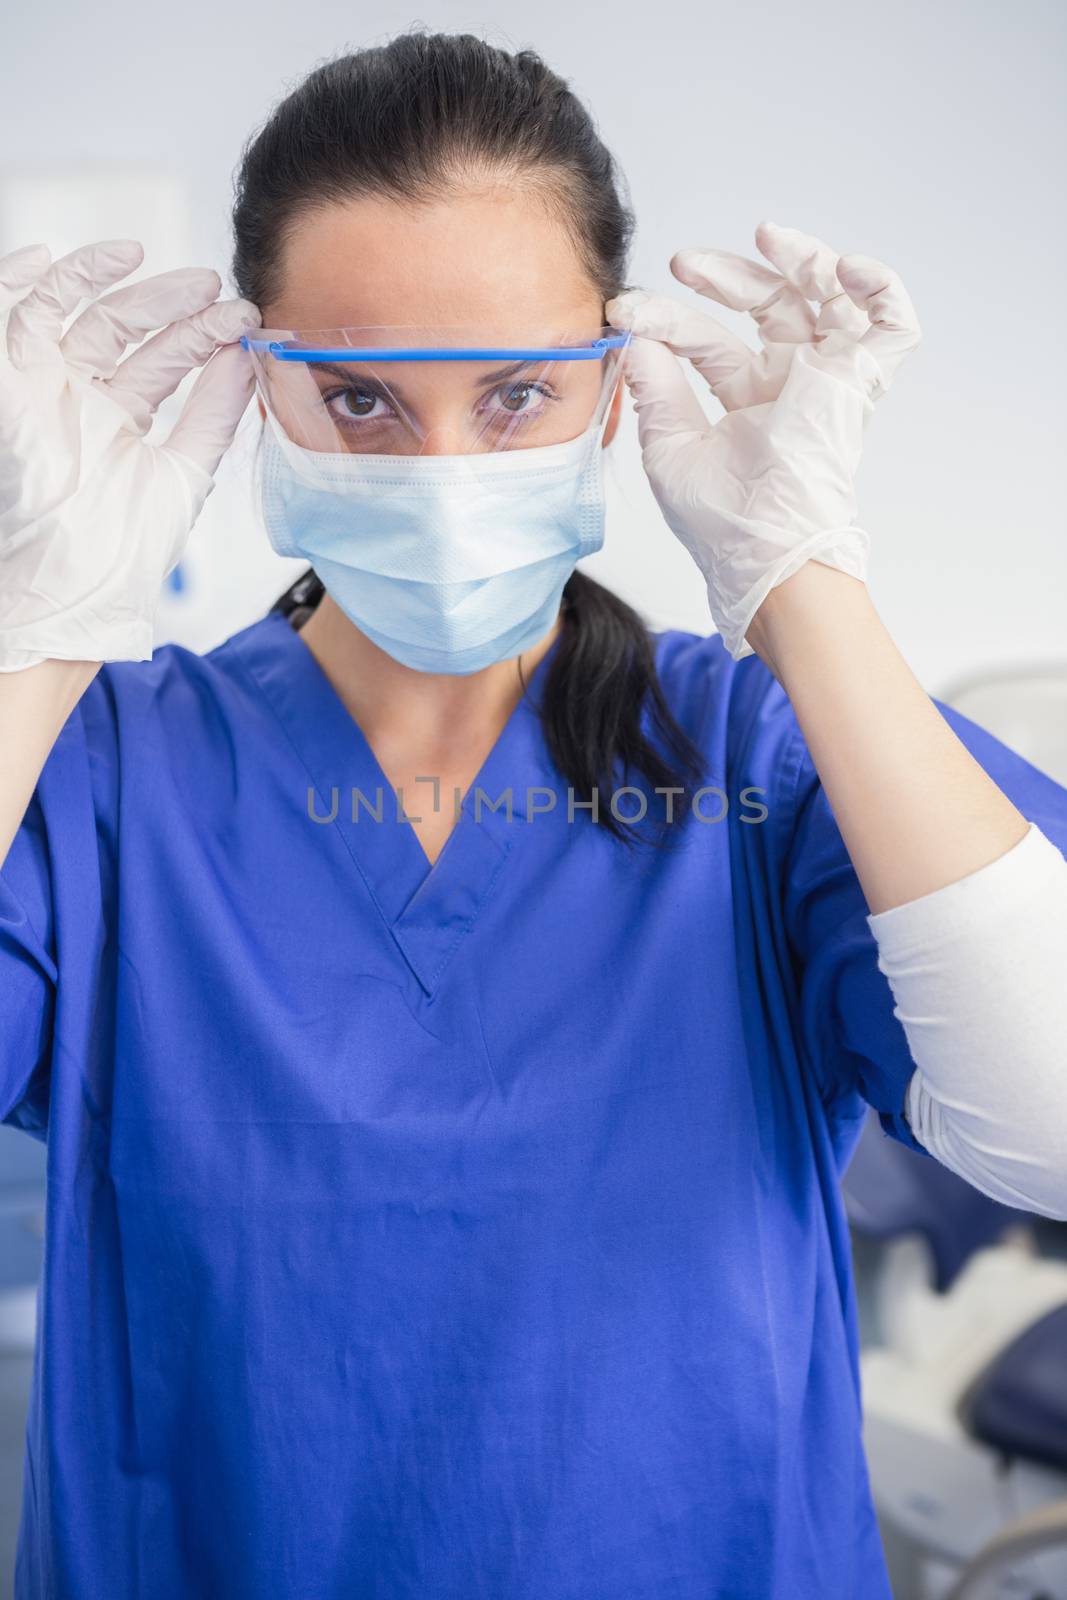 Dentist with surgical mask putting on her safety glasses by Wavebreakmedia